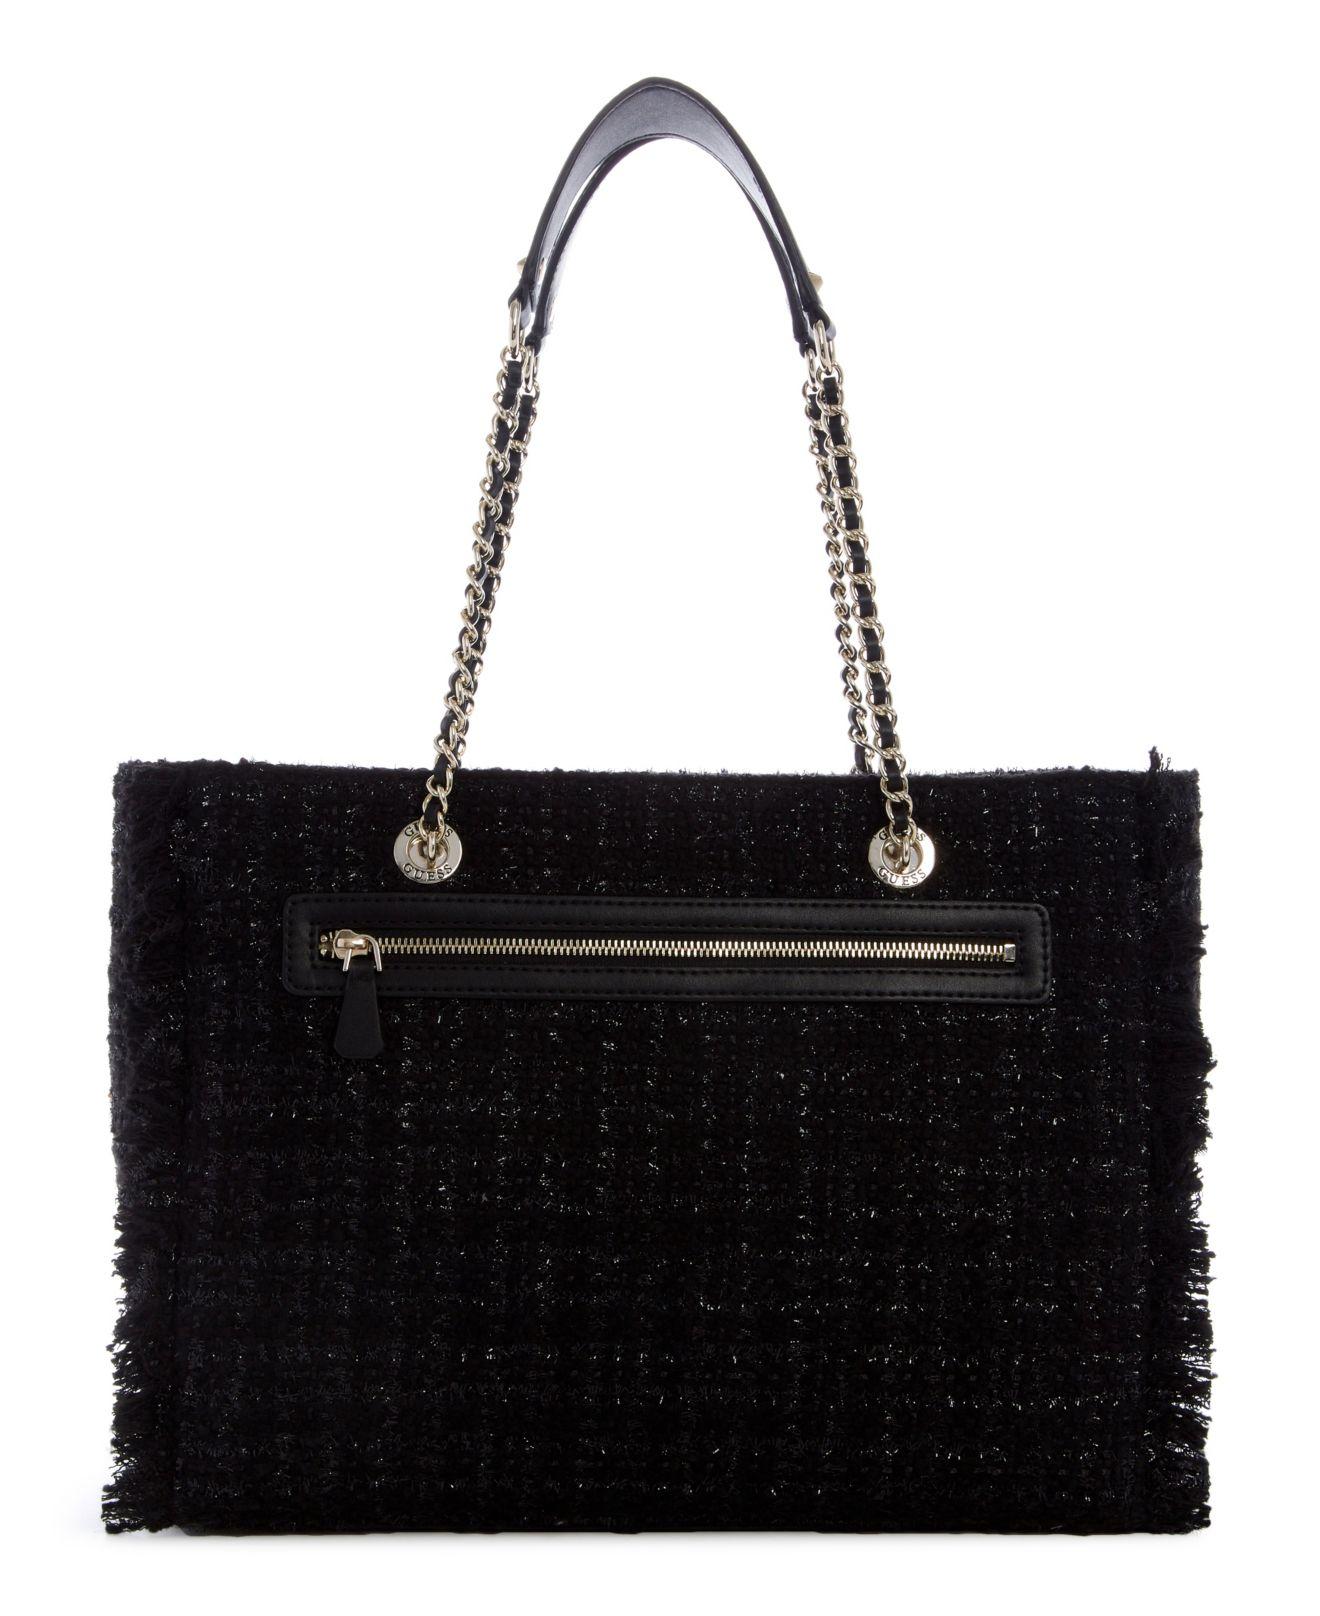 Guess Cessily Tweed Tote in Black | Lyst